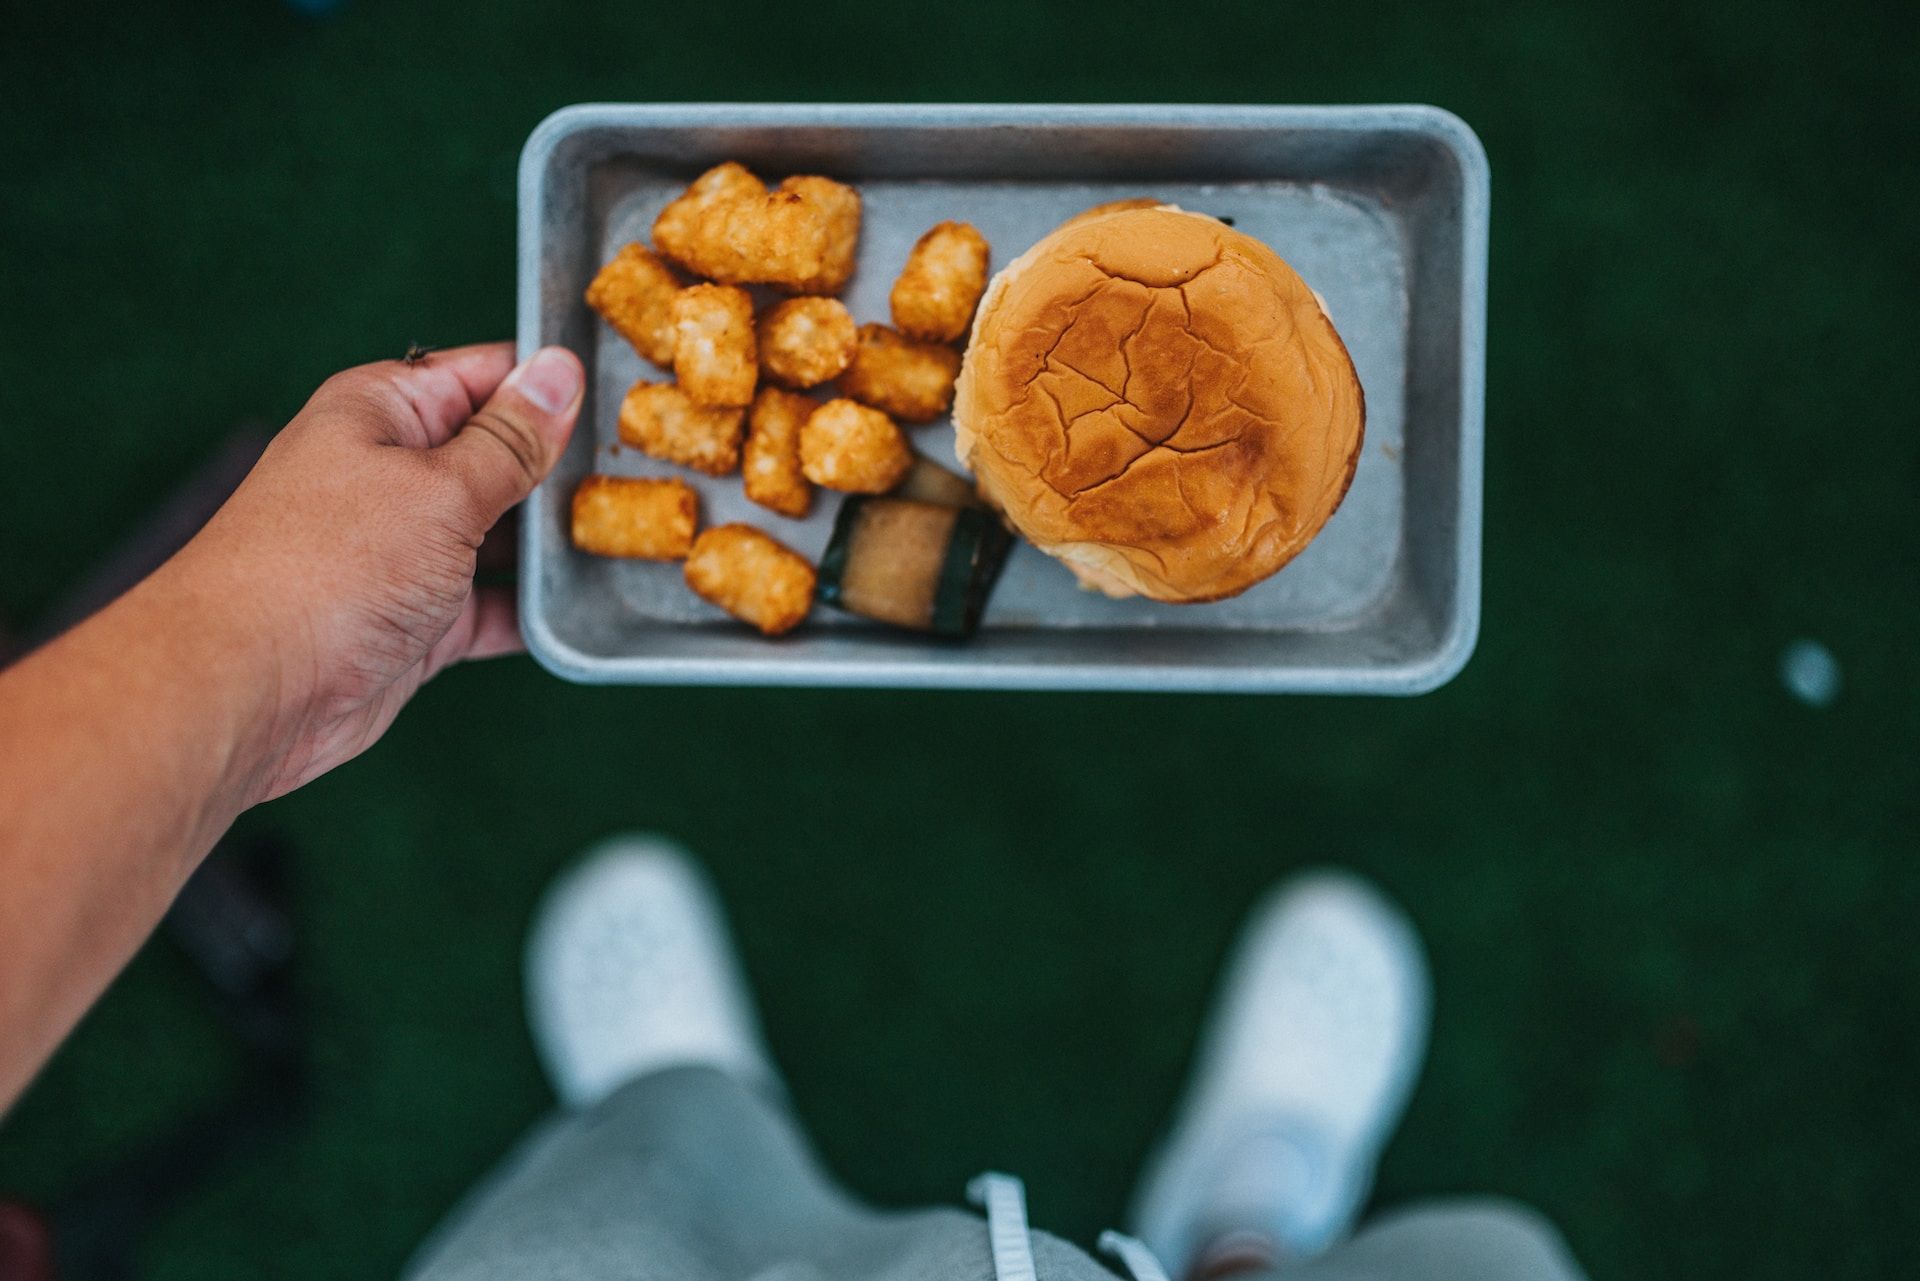 Person holding a tray with a hamburger and a side of tots